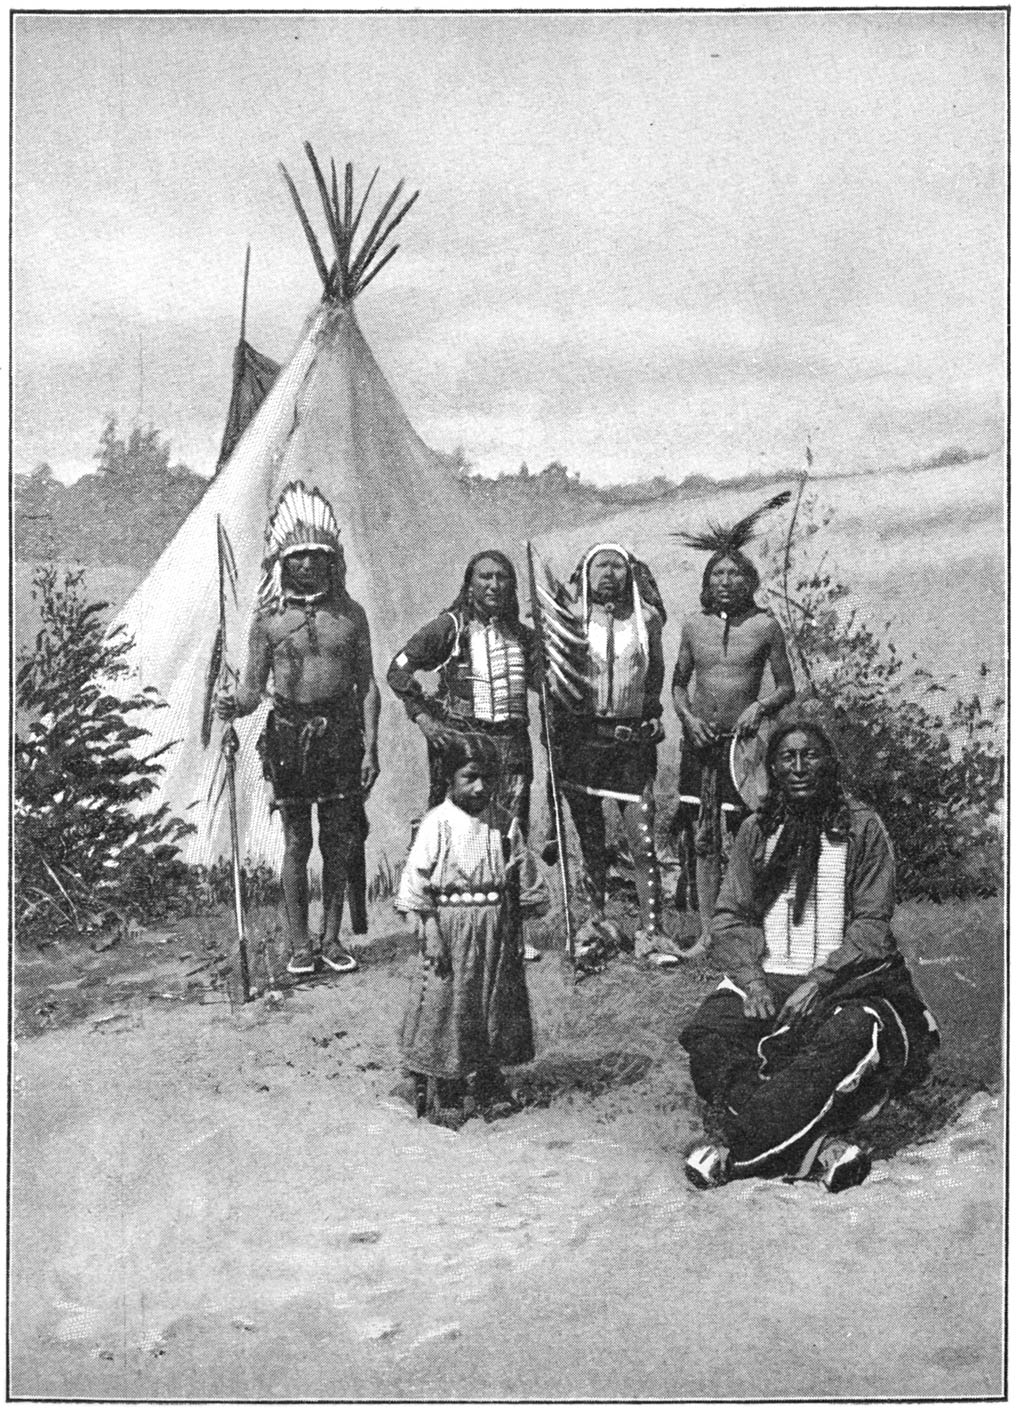 Sioux Indians and Teepee